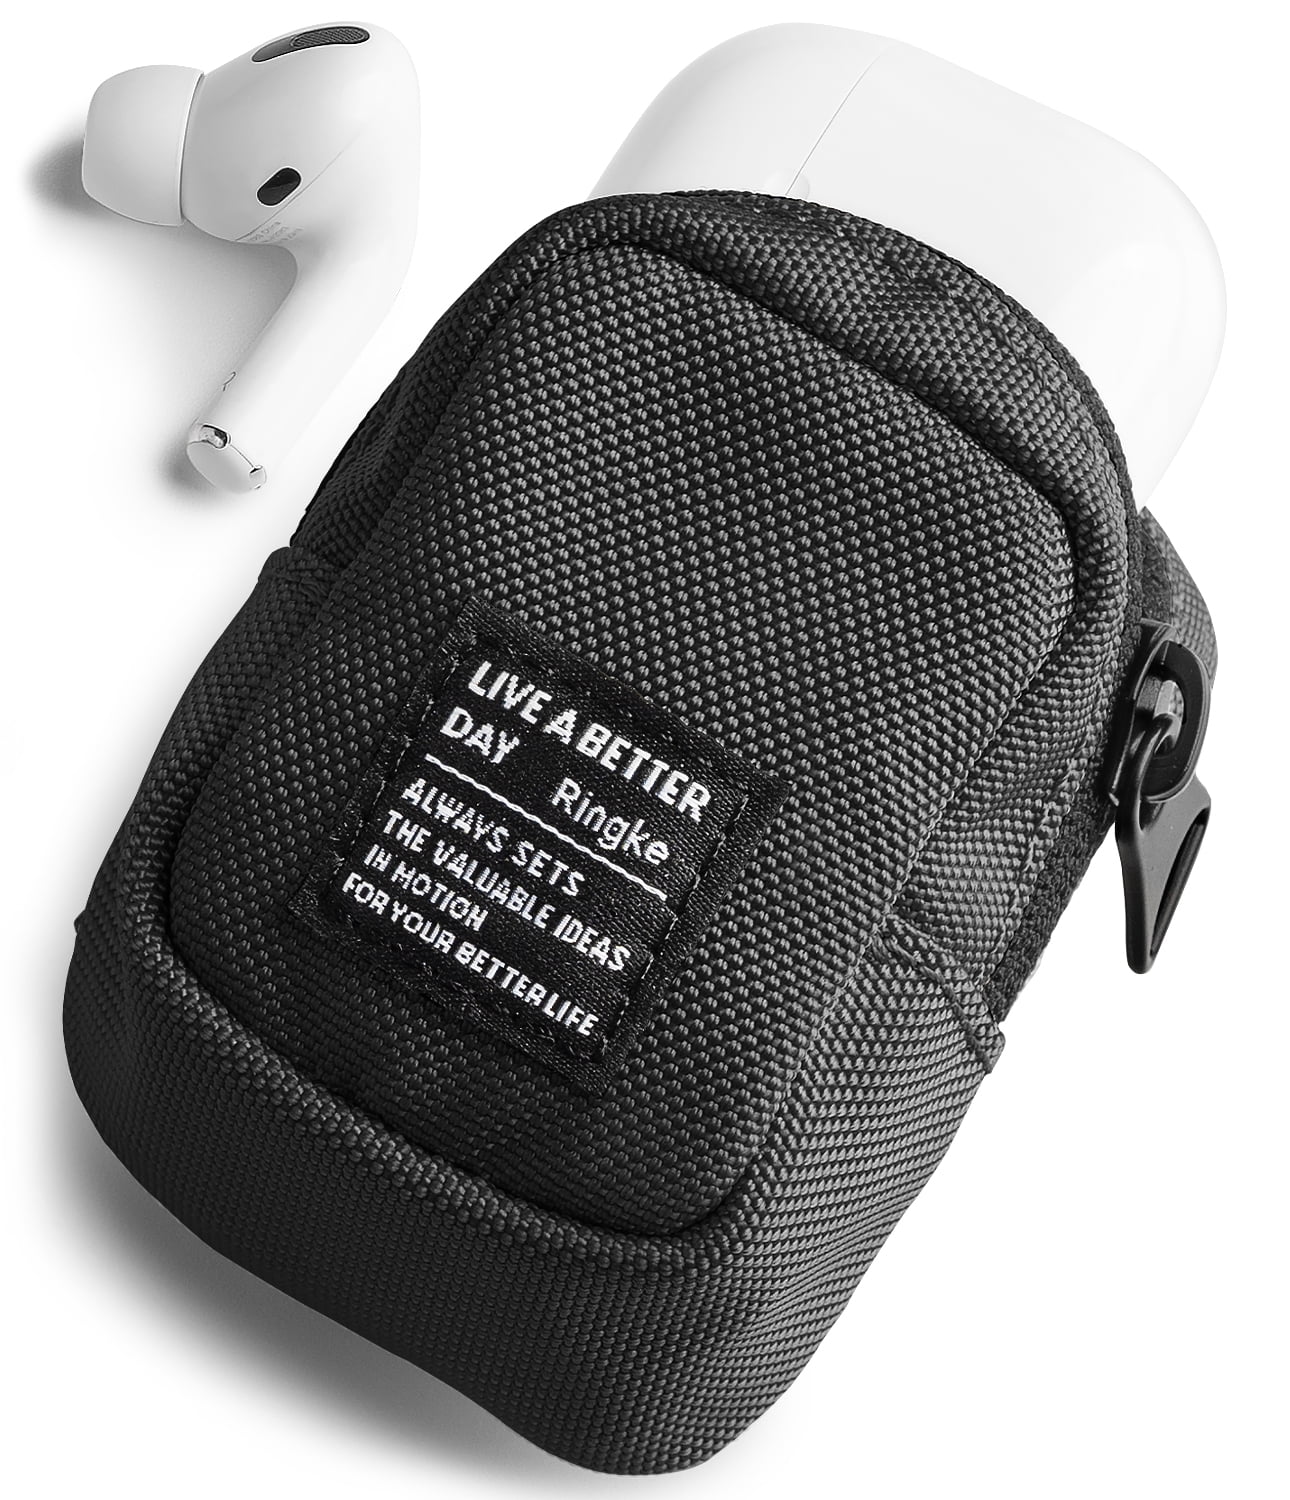 Ringke 2-Way Bag Miniature  AirPods Case – Ringke Official Store